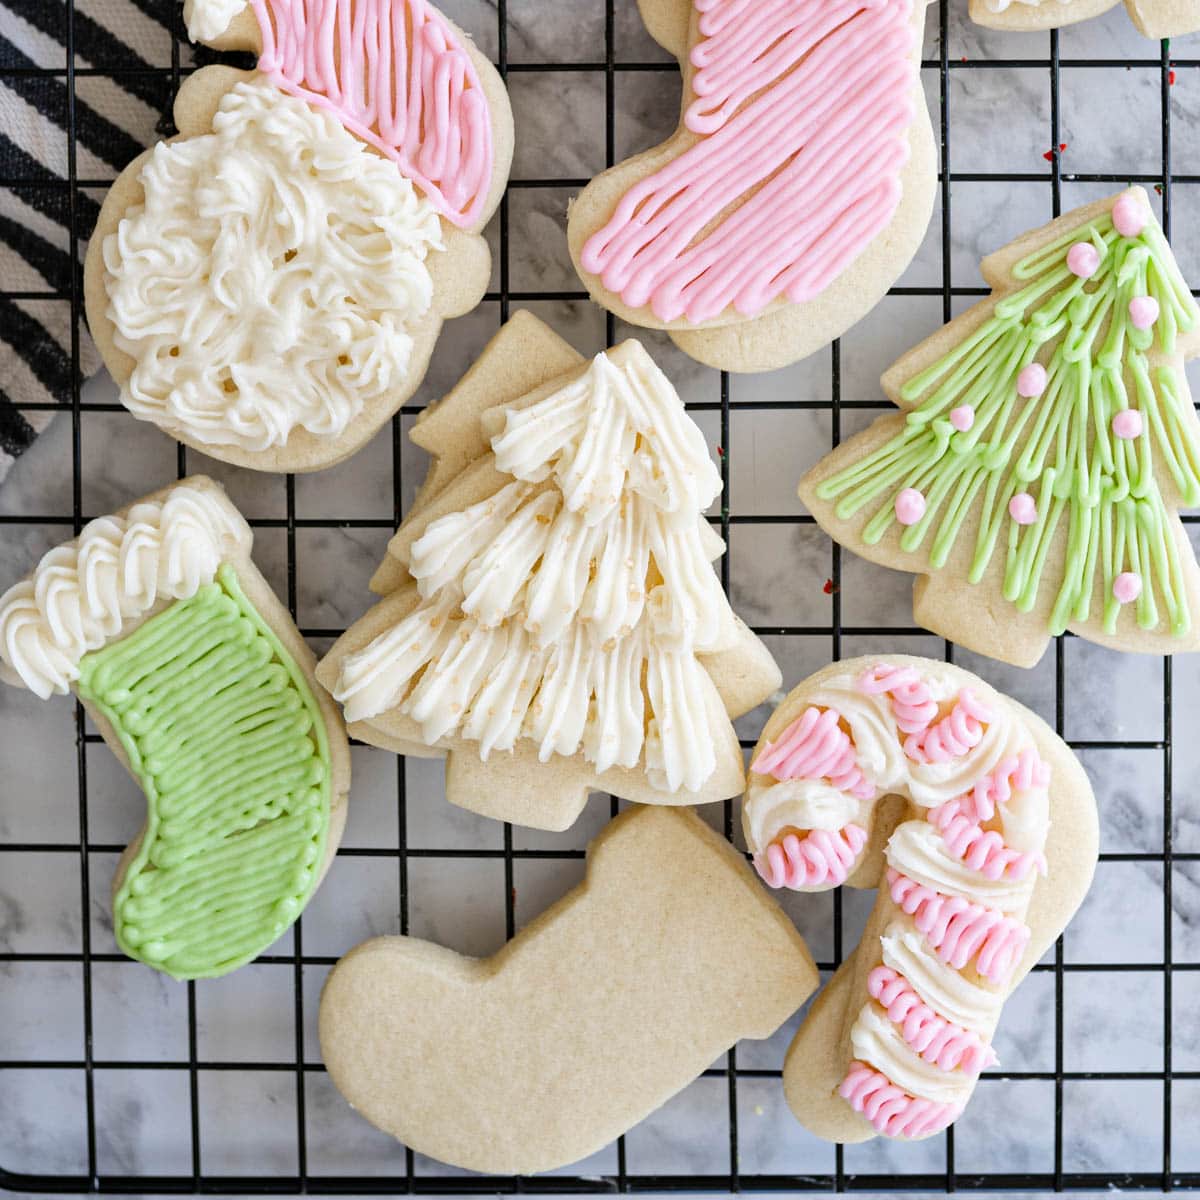 Royal Icing Recipe - Delicious and Perfect for Cookie Decorating